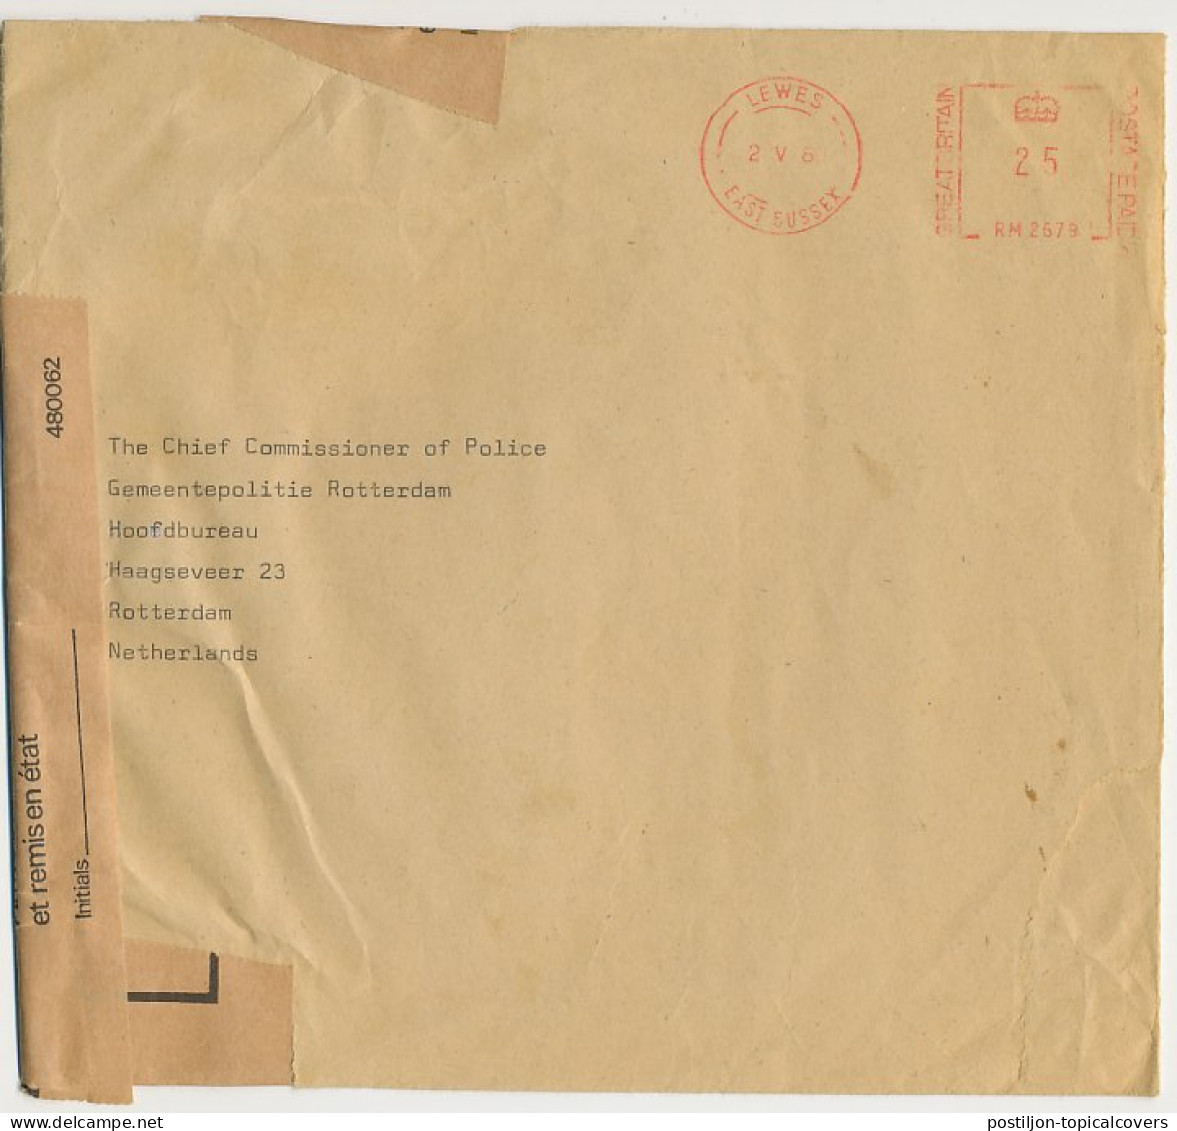 Damaged Mail Cover GB / UK - Netherlands 1980 Found Damaged - Officially Secured - Label / Tape - Unclassified